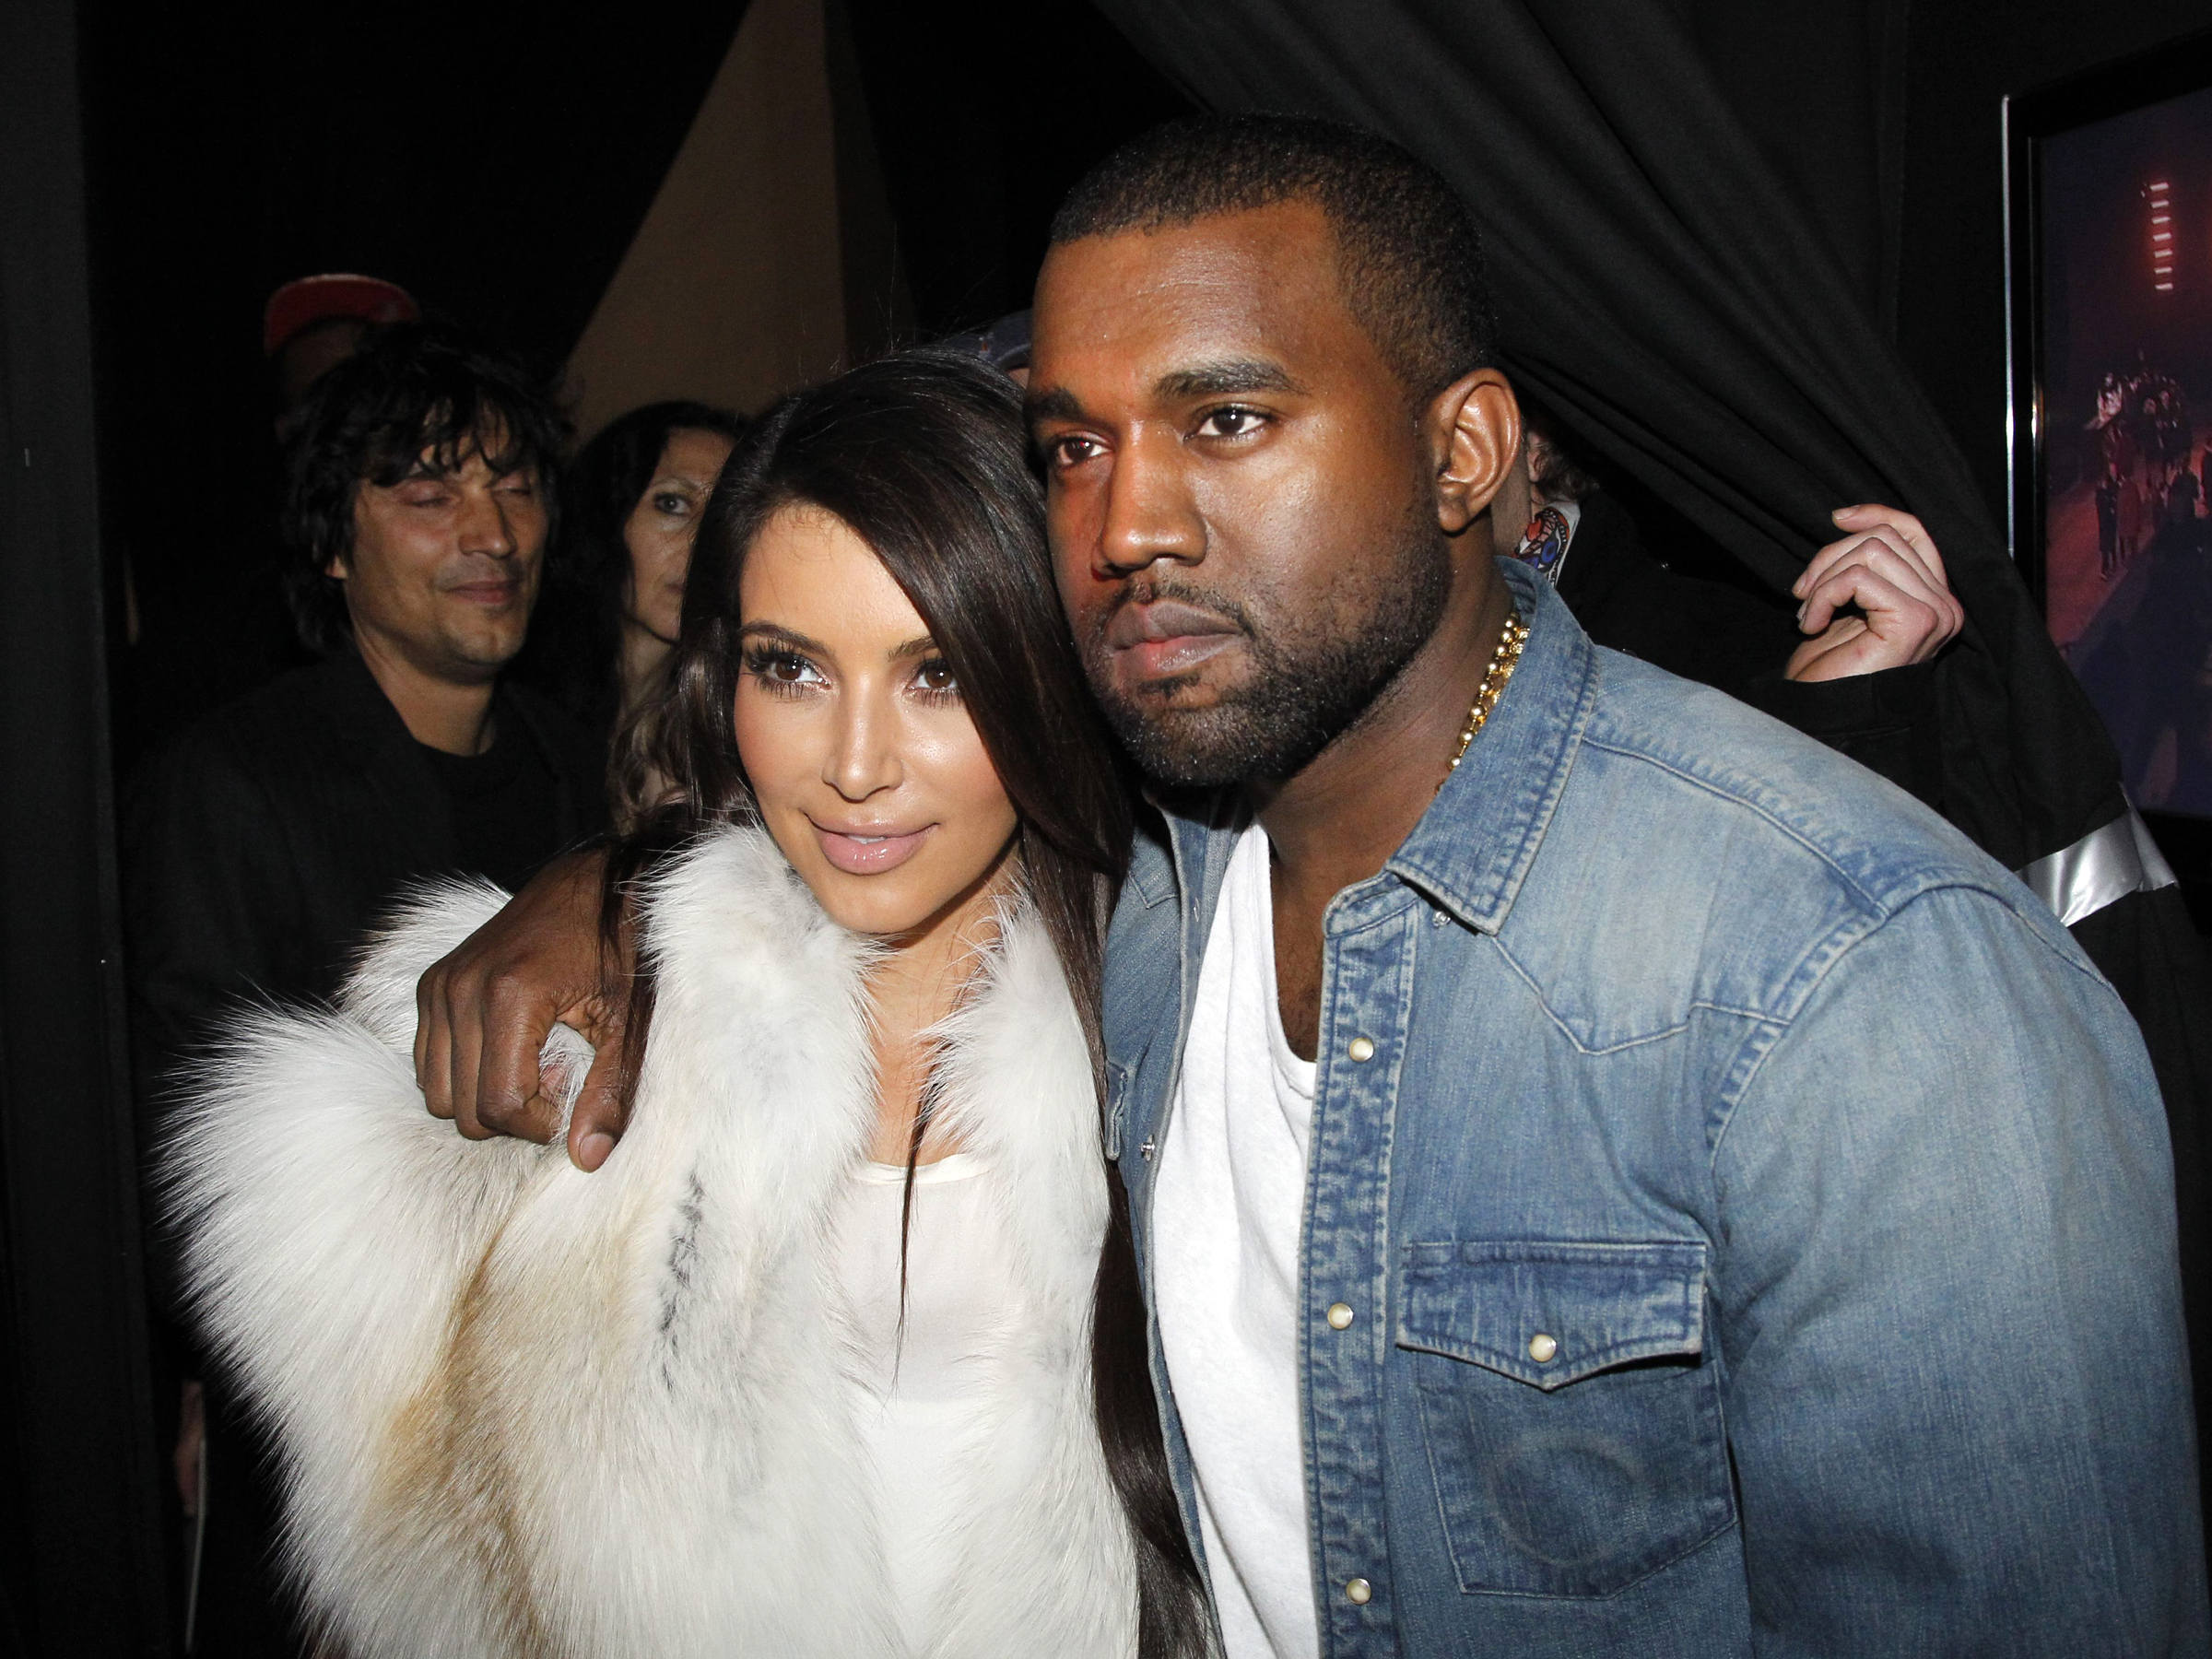 PARIS, FRANCE - MARCH 06: Kim Kardashian and Kanye West attend the Kanye West  Ready-To-Wear Fall/Winter 2012 show as part of Paris Fashion Week at Halle Freyssinet on March 6, 2012 in Paris, France. (Photo by Eric Ryan/Getty Images)